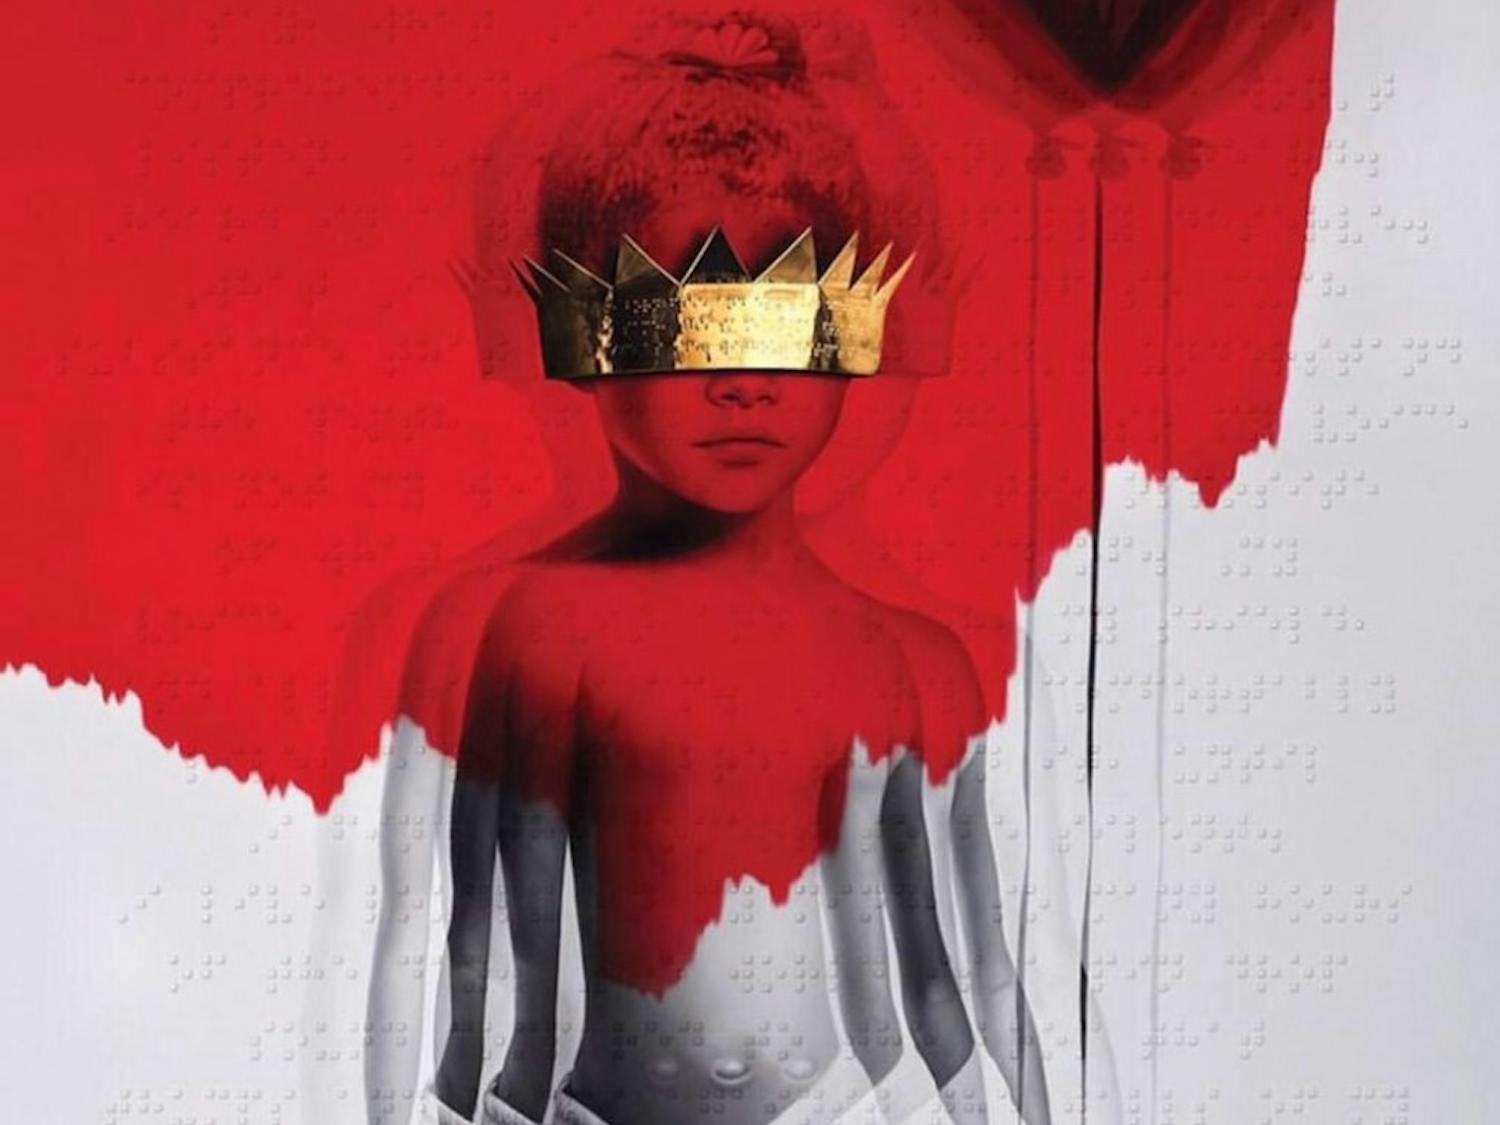 Rihanna’s 8th studio album is the pop star’s most conceptual album to date. But, despite its creative stretches, it is without a doubt Rihanna’s most complete pop album yet.